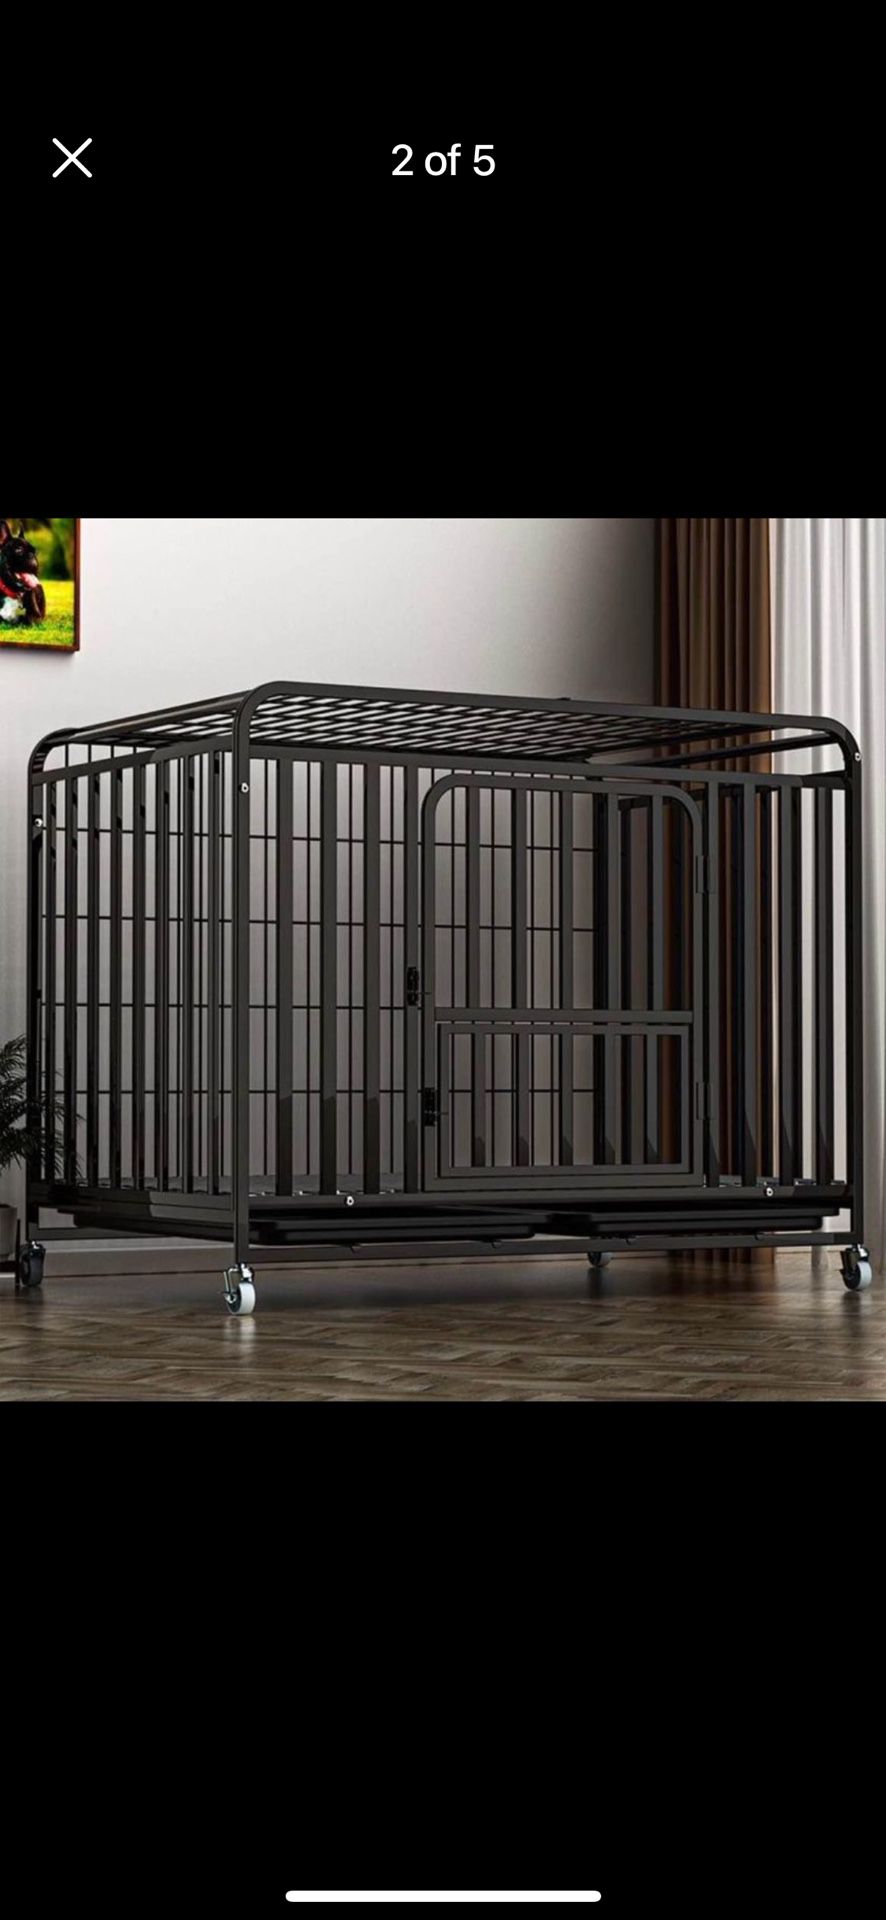 Heavy Dog Crate